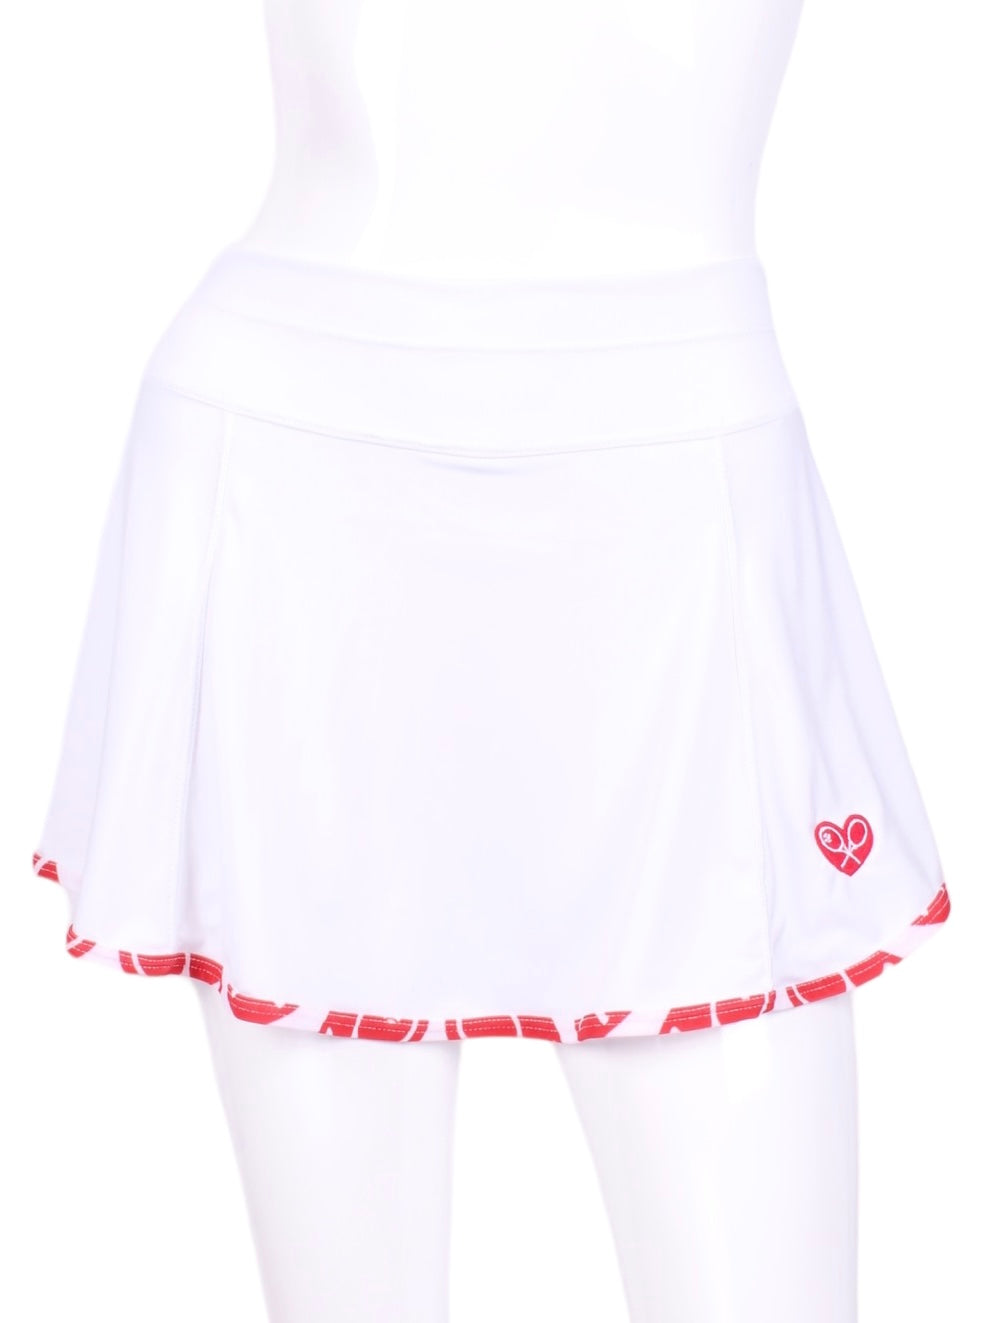 This is our limited edition Gladiator Skirt White With Red Stitching.  This piece has a silky soft and quick-drying matching shorties, and binding to match.  We make these in very small quantities - by design.  Unique.  Luxurious.  Comfortable.  Cool.  Fun.